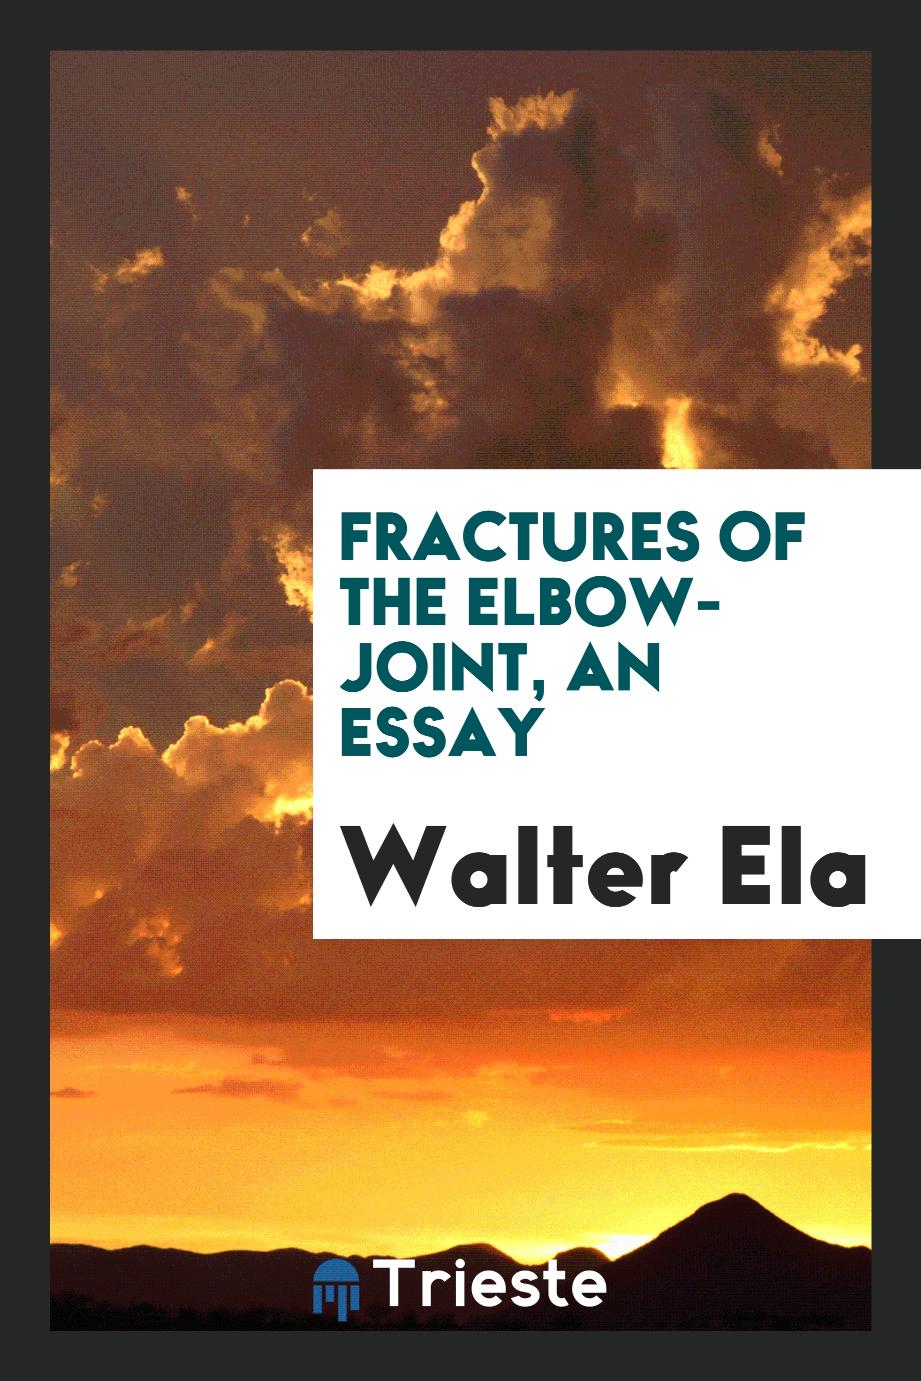 Fractures of the elbow-joint, an essay